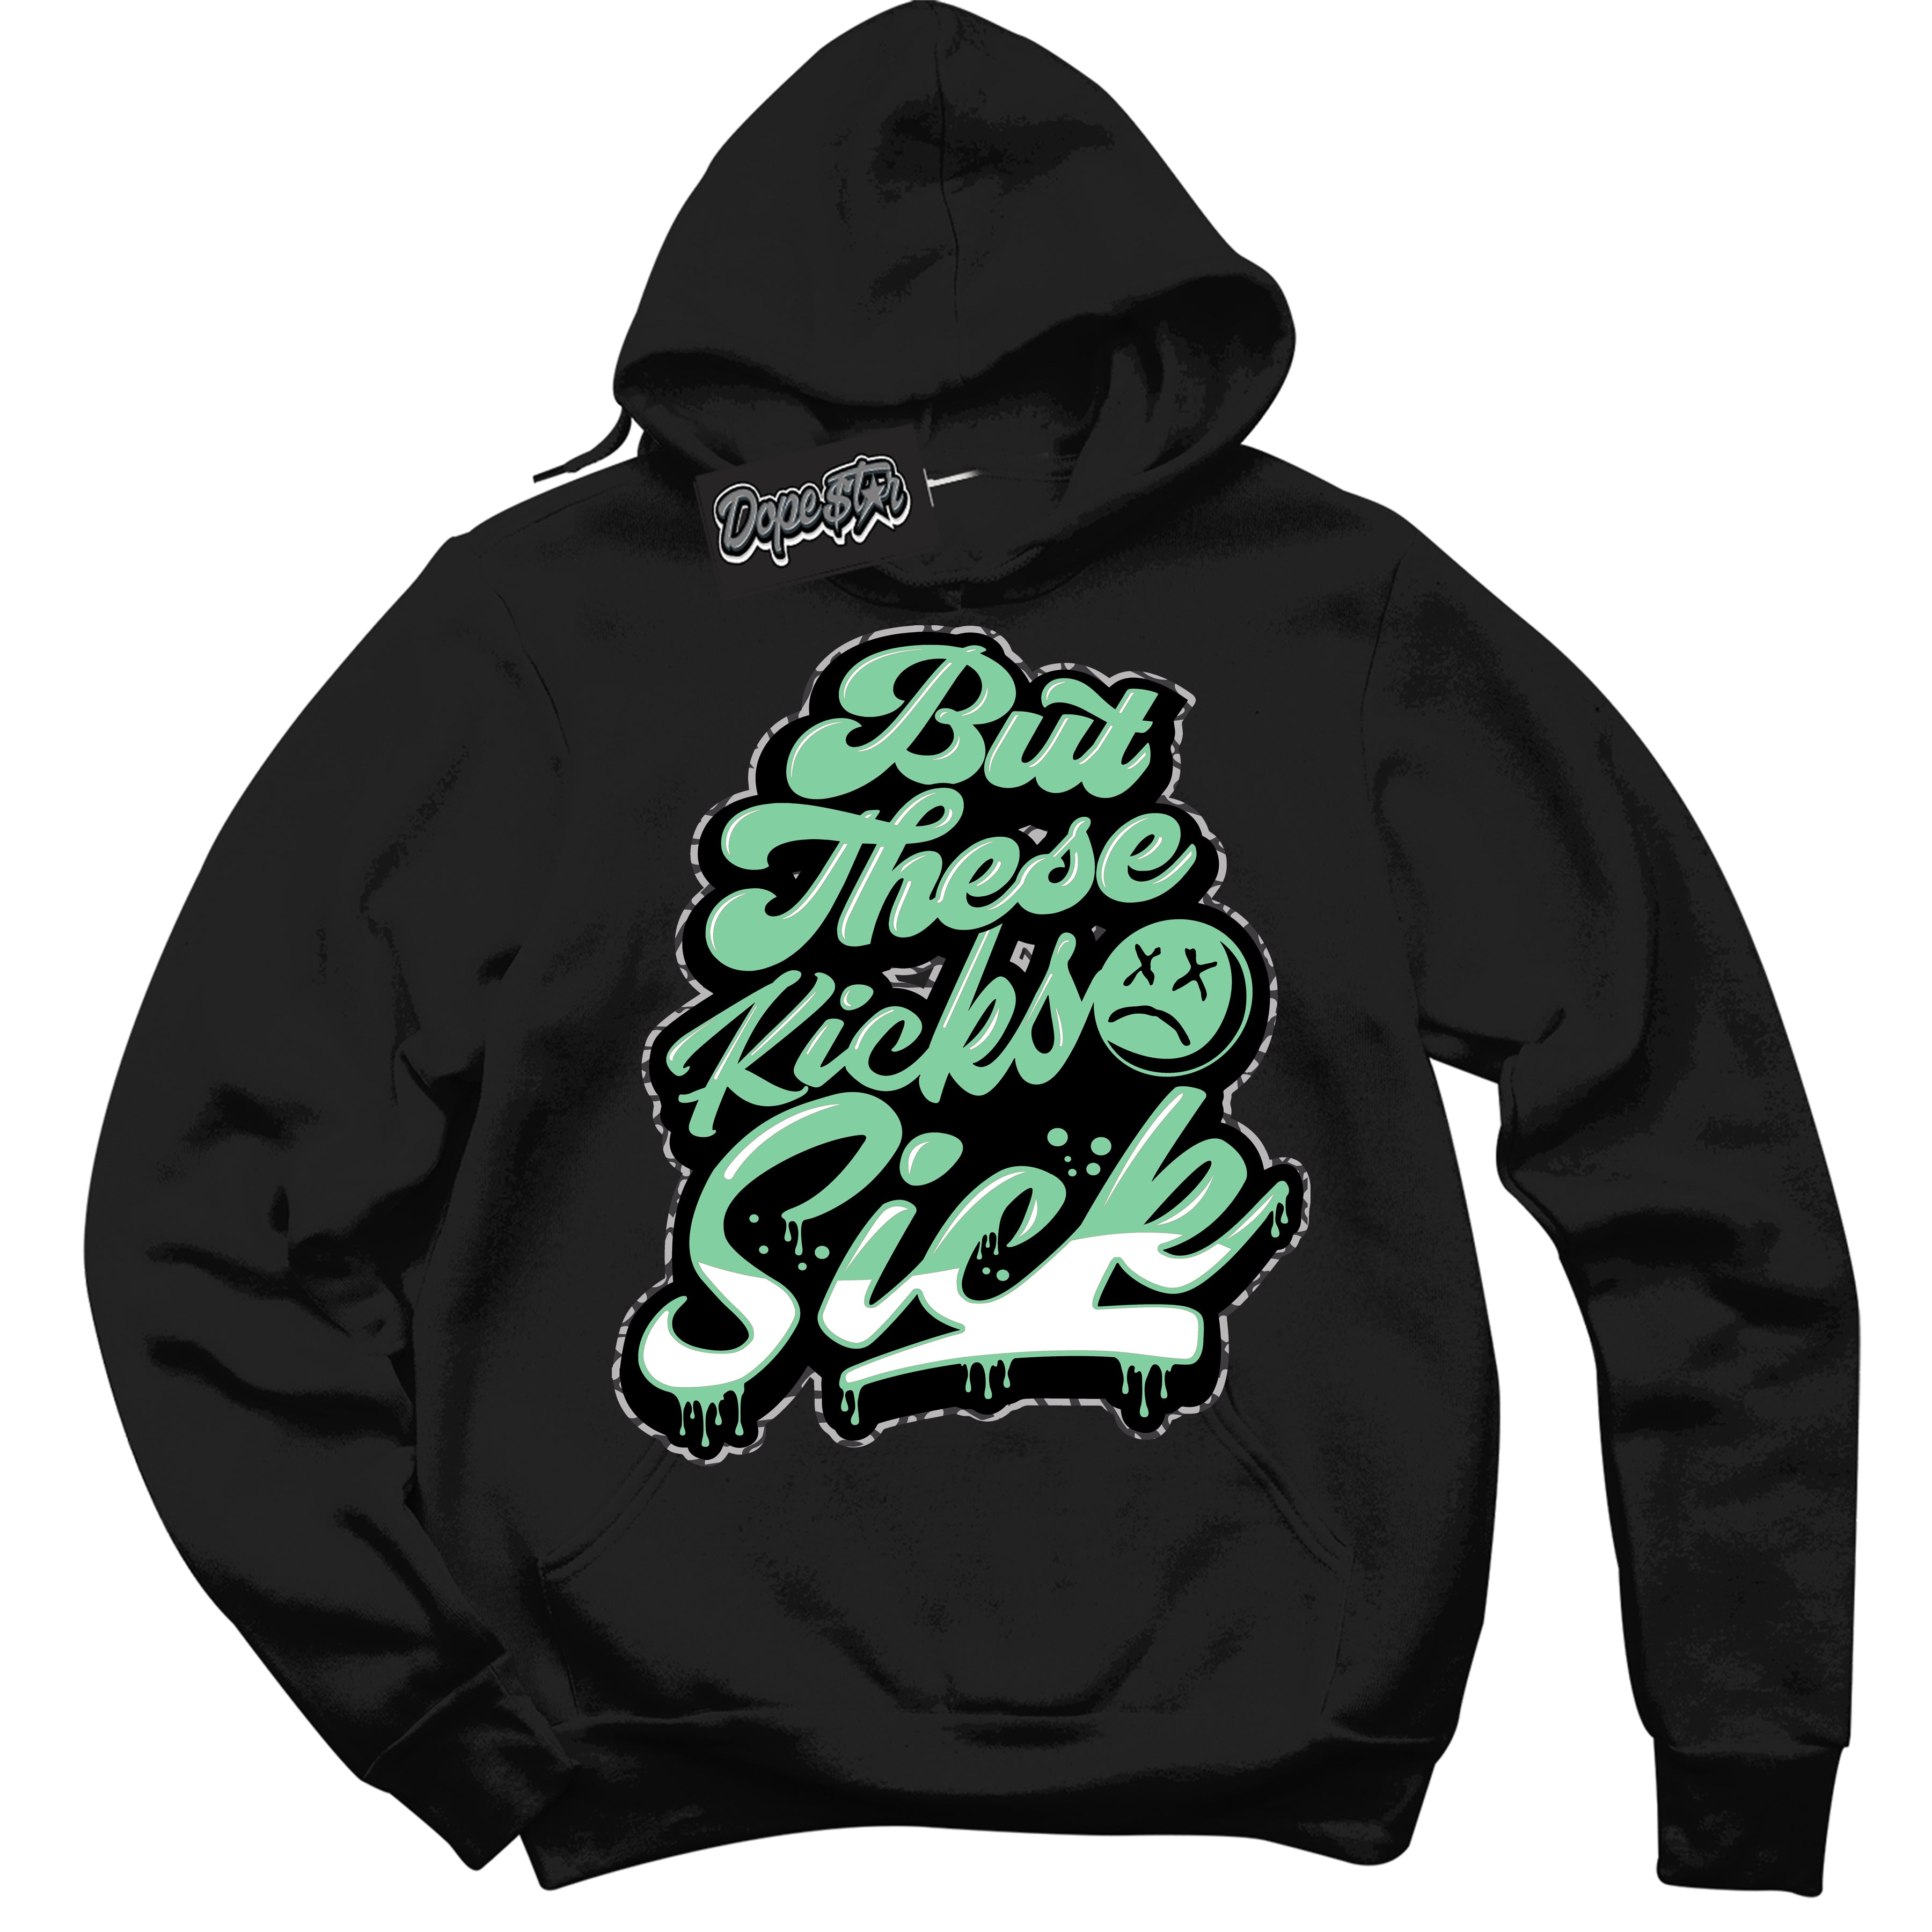 Cool Black Graphic DopeStar Hoodie with “ Kick Sick “ print, that perfectly matches Green Glow 3S sneakers